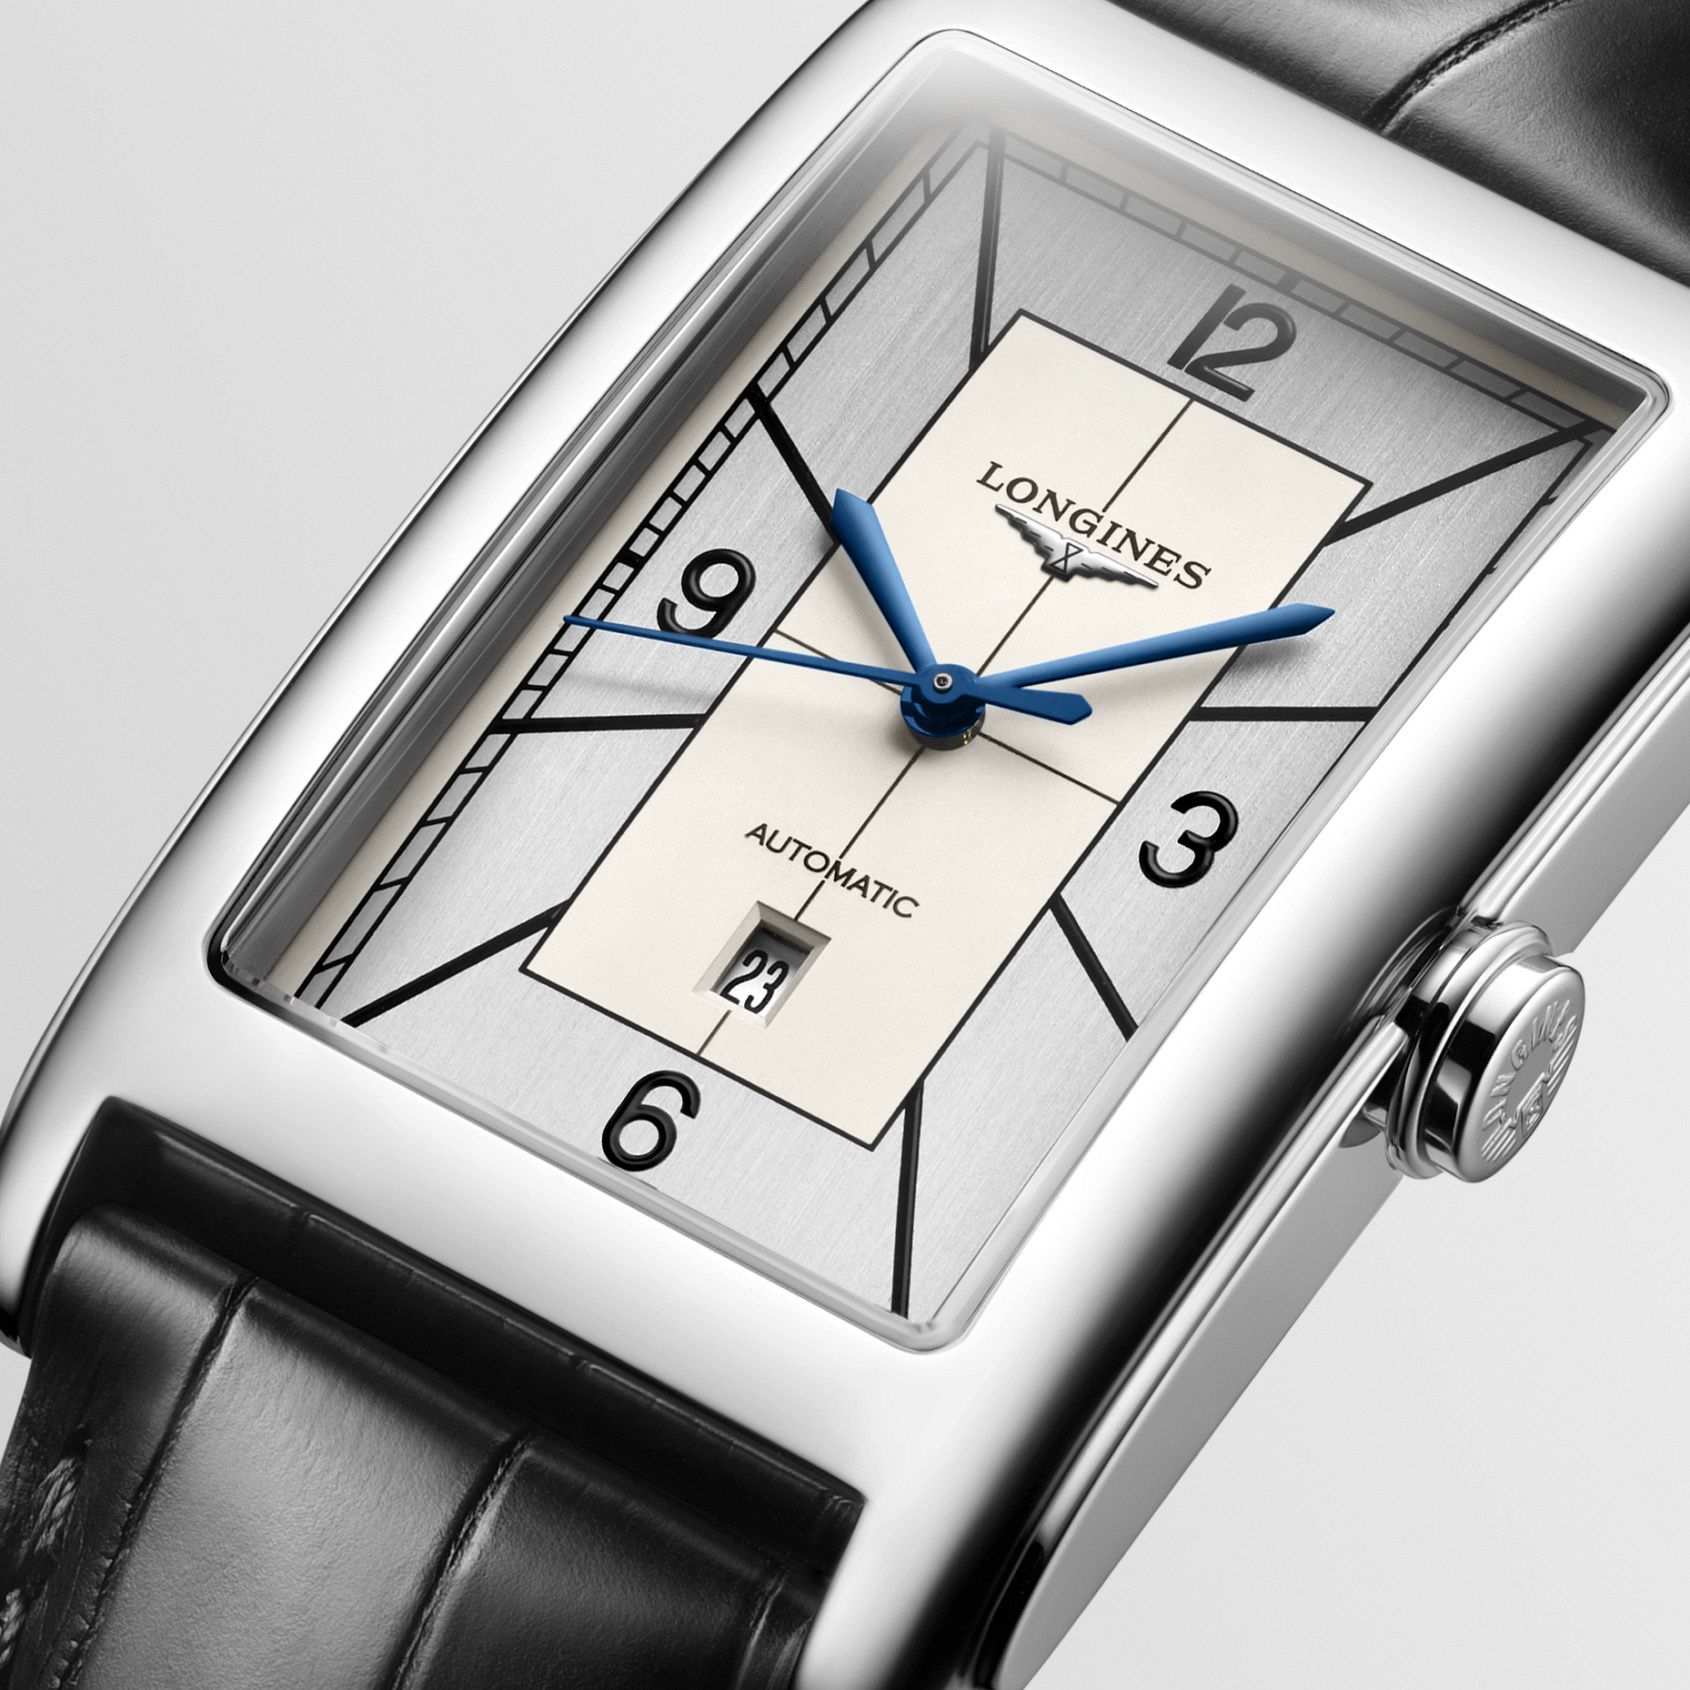 The Longines DolceVita adds sector dials to its range